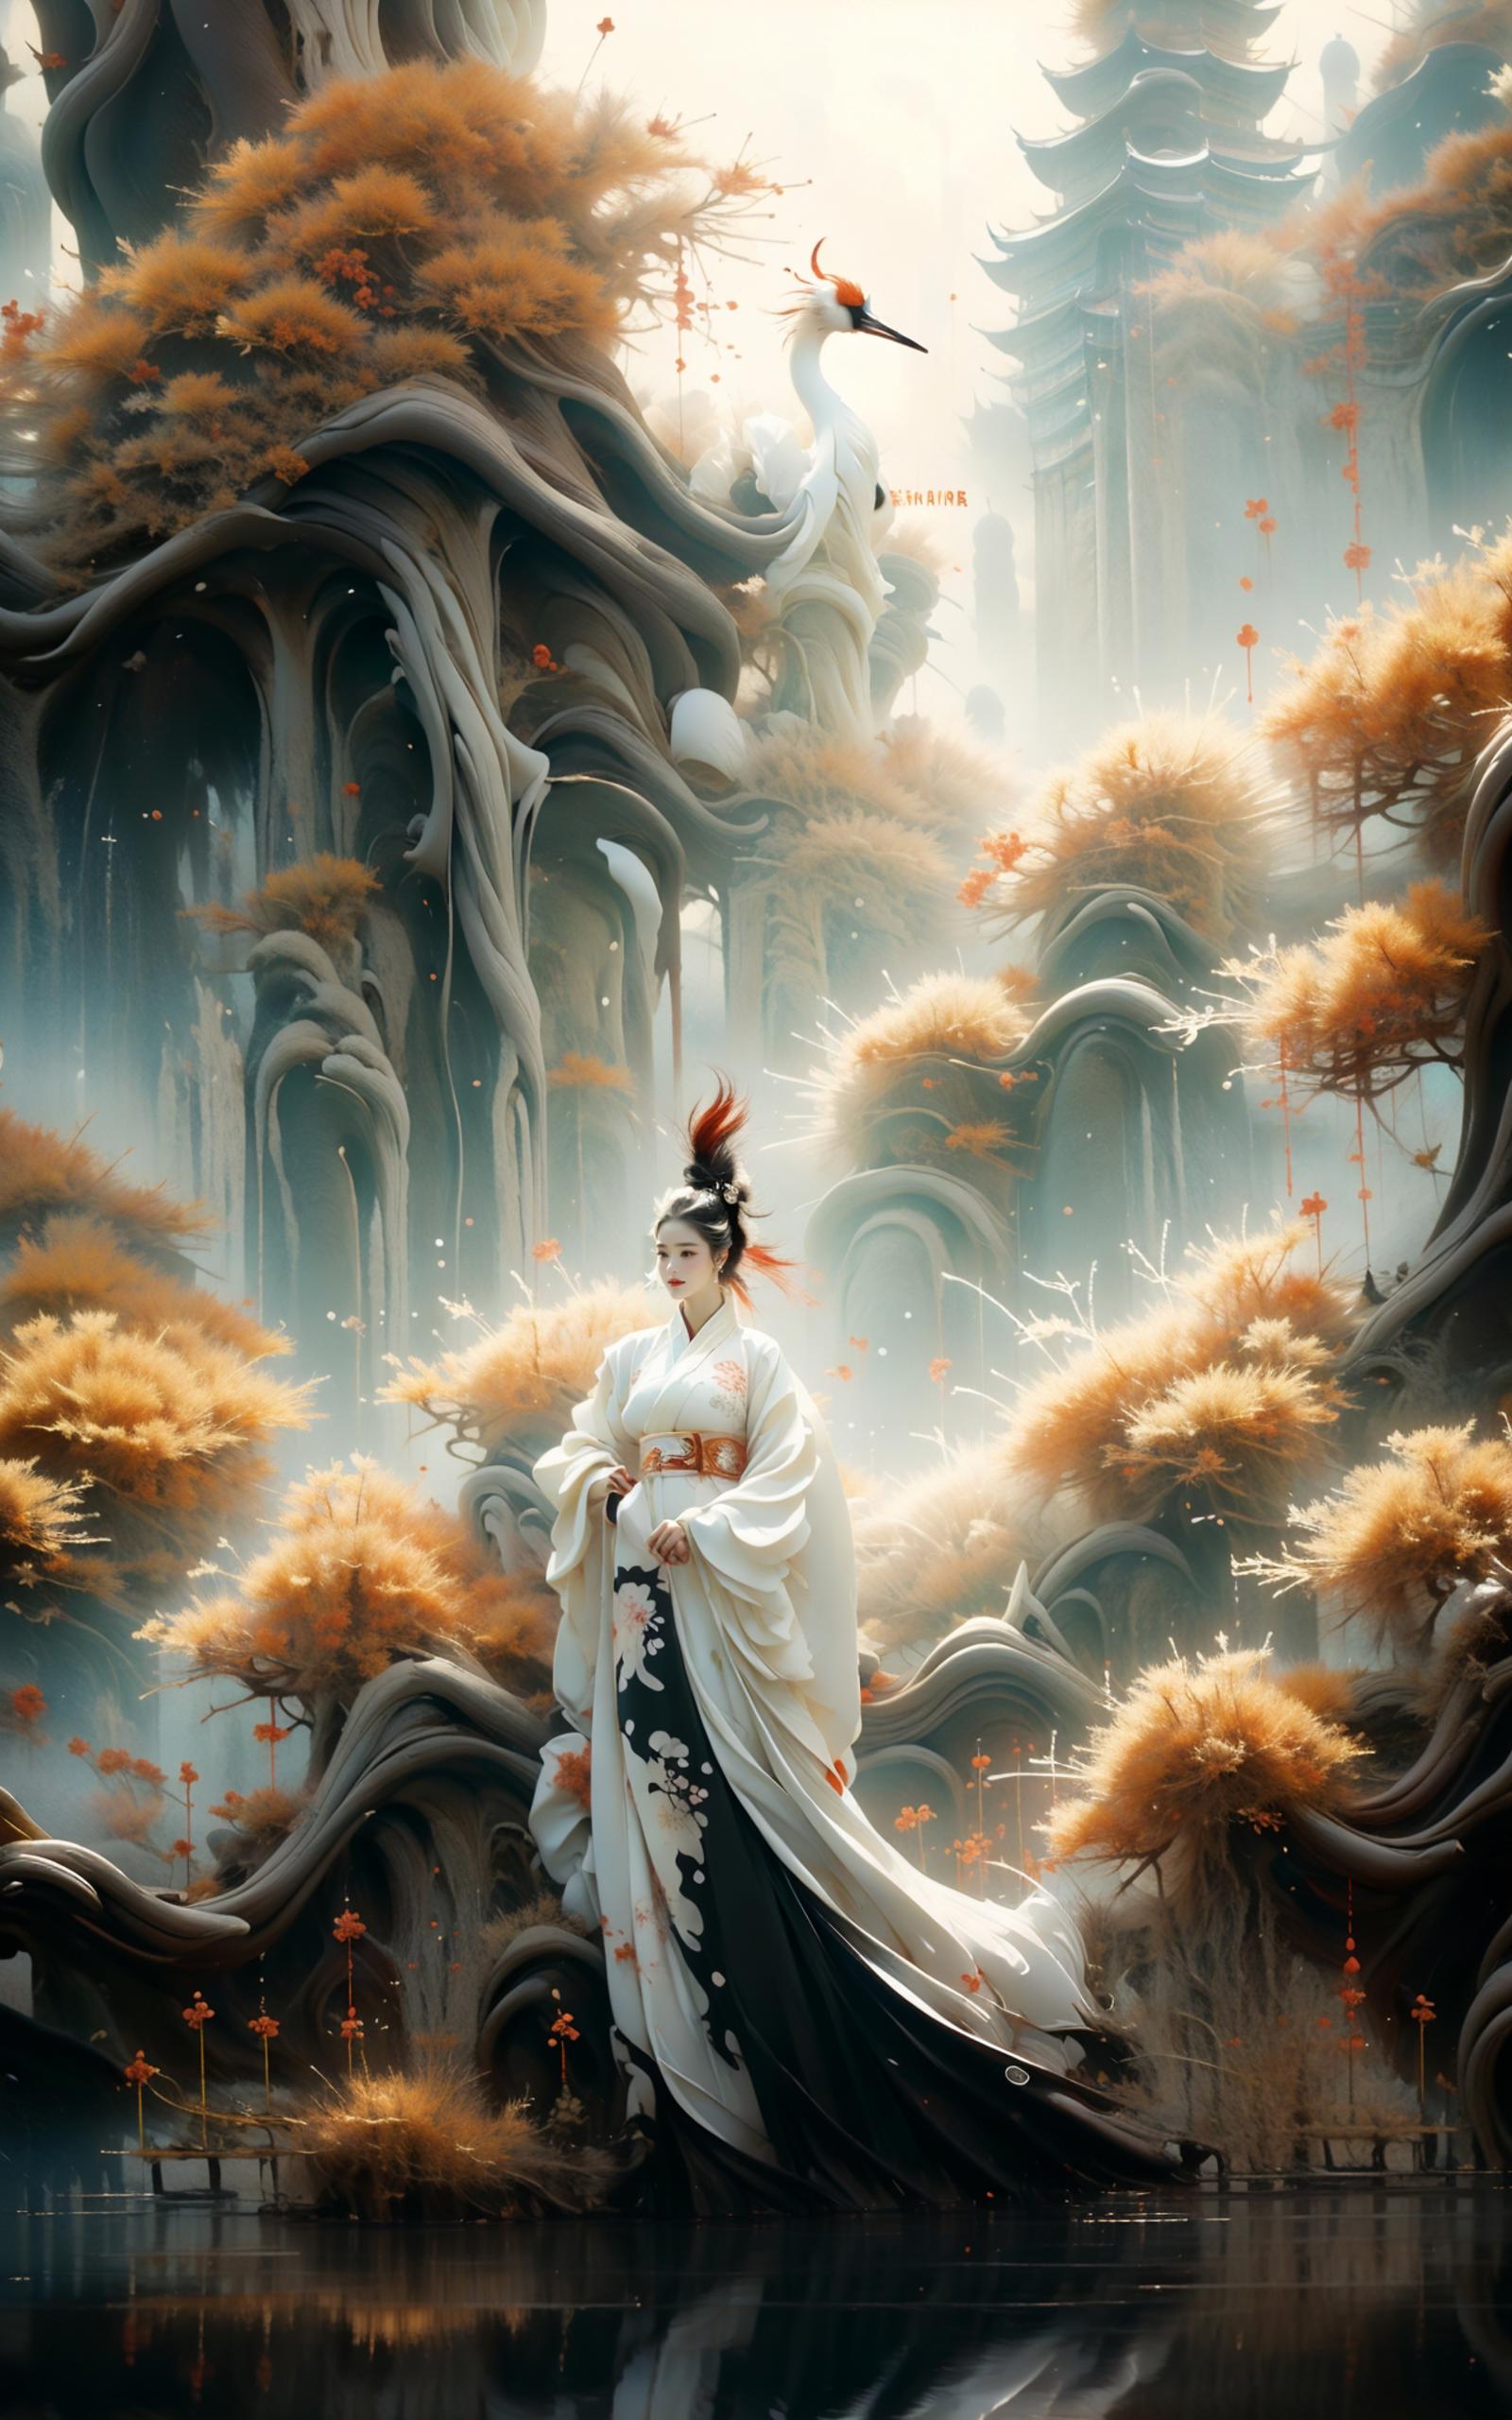 Anime-style woman in a white dress with a red fan standing in a forest of strange, gnarly trees.